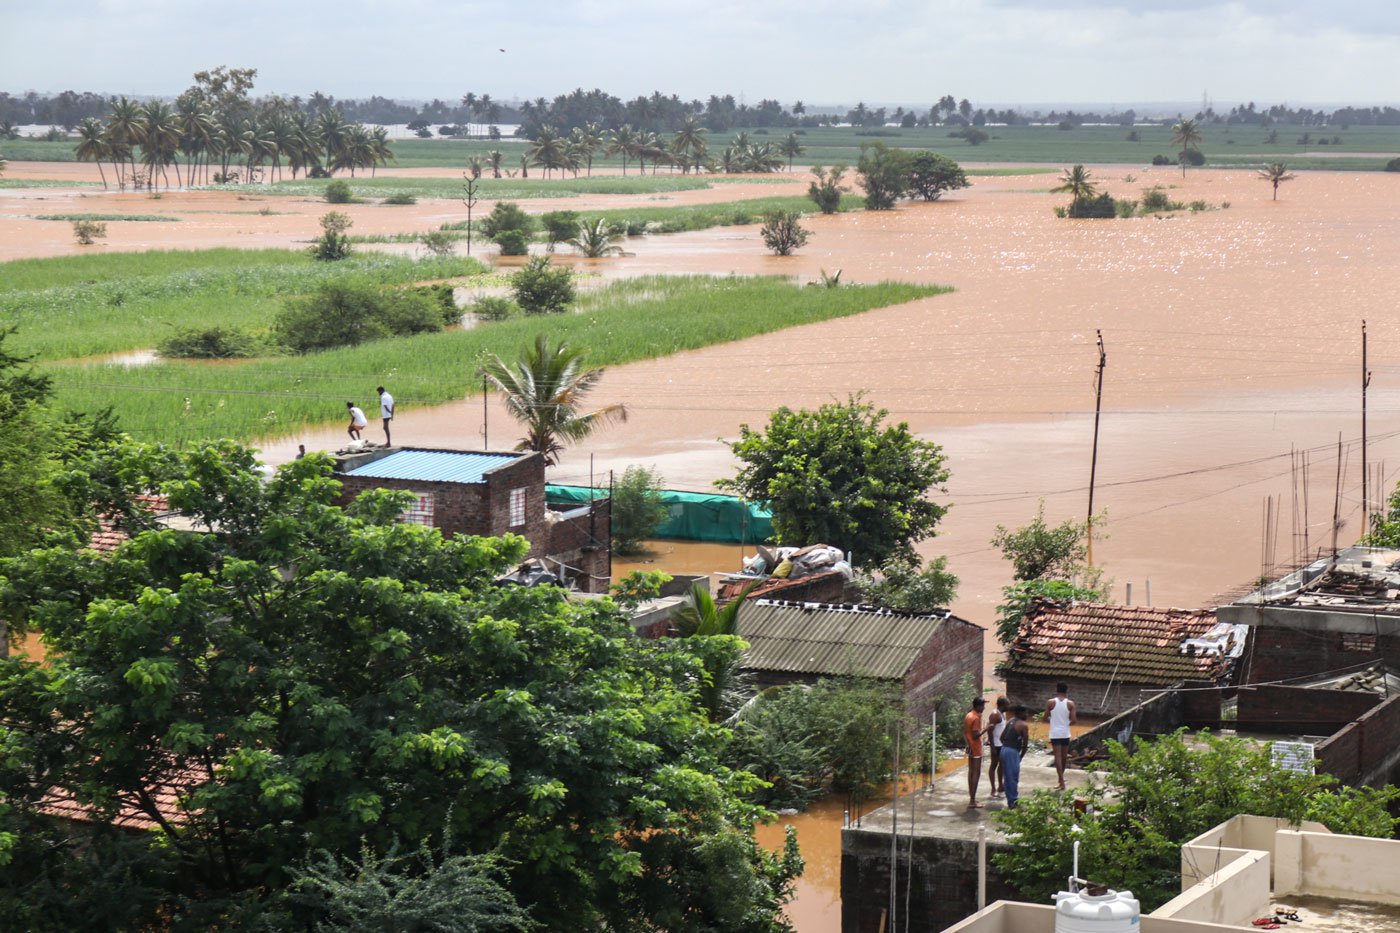 Flood water in the village of Udgaon in Kolhapur’s Shirol taluka . Incessant and heavy rains mean that the fields remain submerged and inaccessible for several days, making it impossible to carry out any work